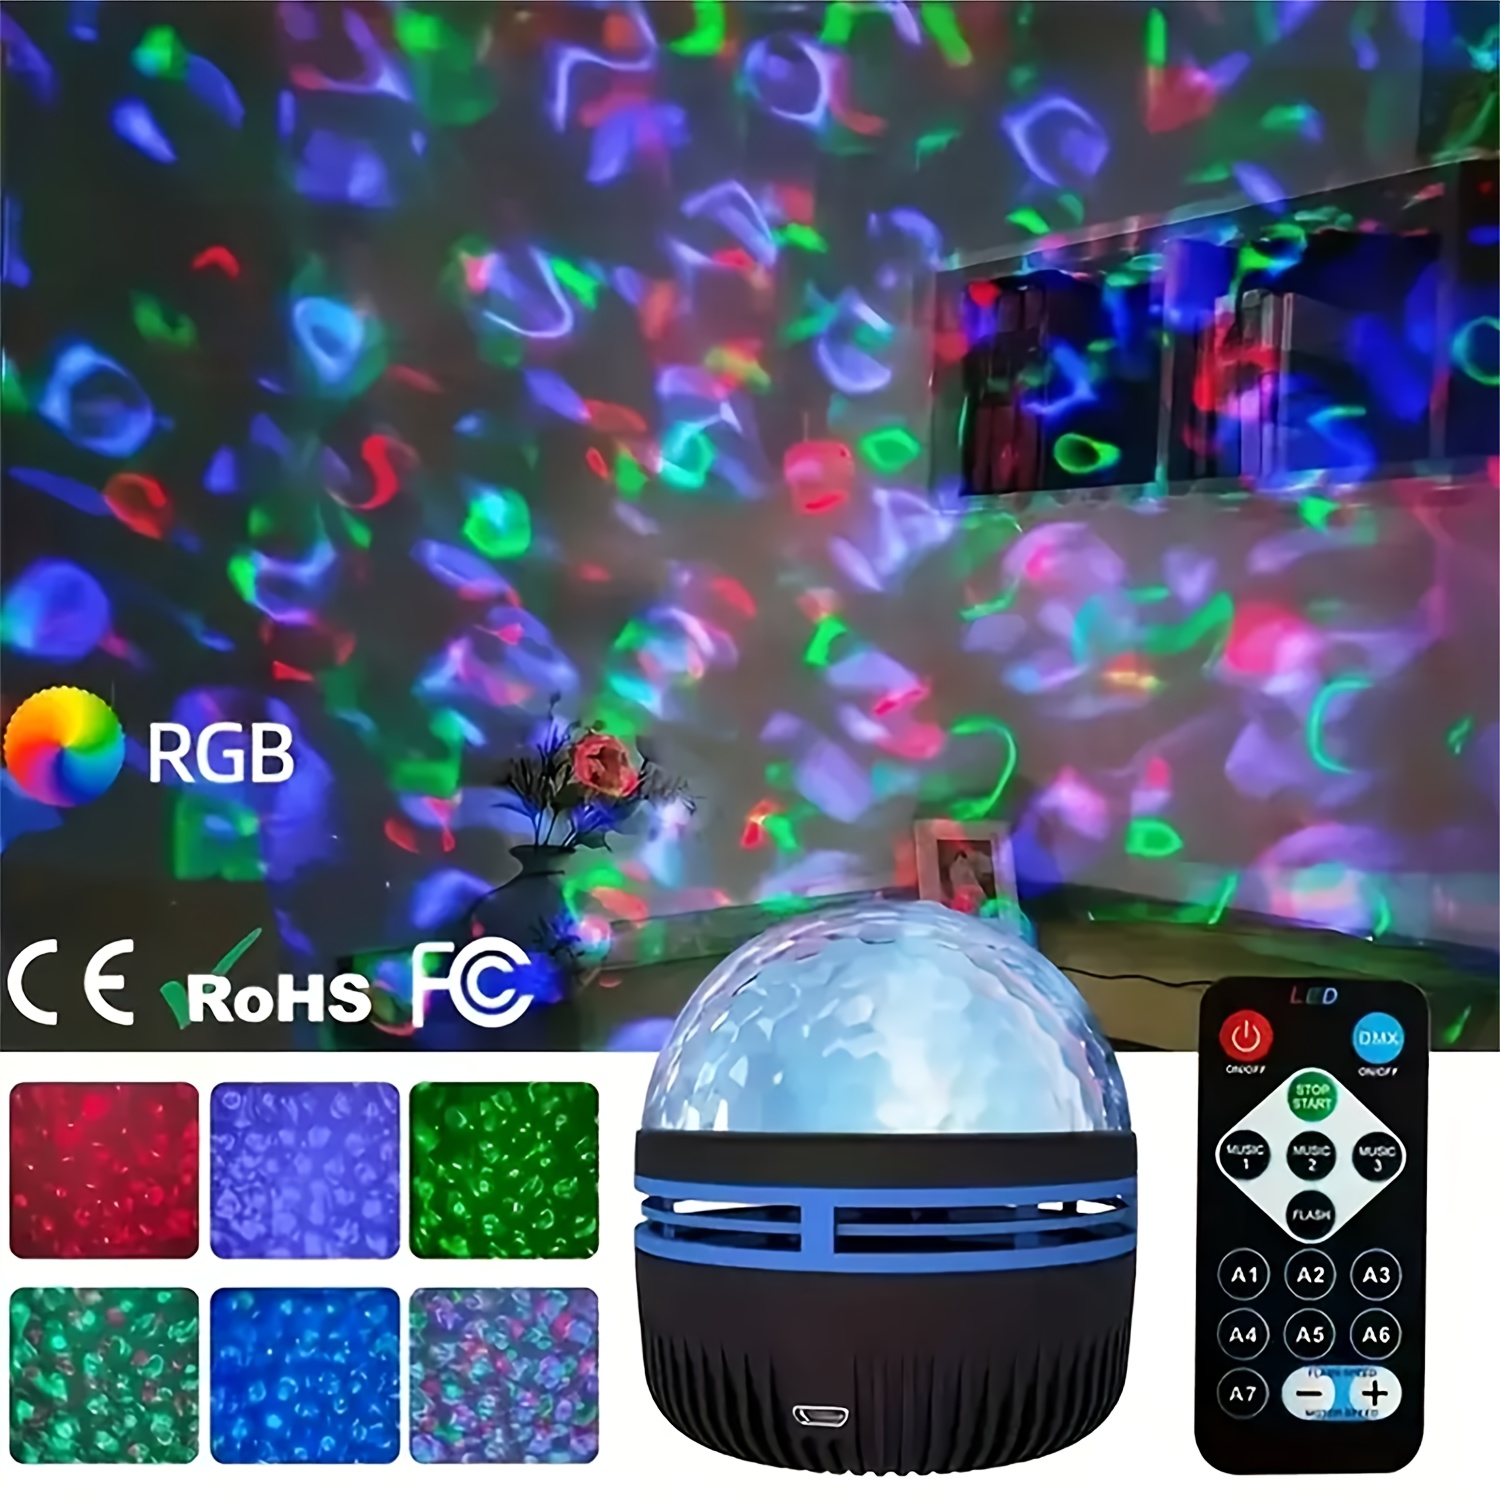 

Starry Night Led Light - Water Ripple Effect, Crystal Magic Ball Design For Bedroom Ambiance & Stage Decor